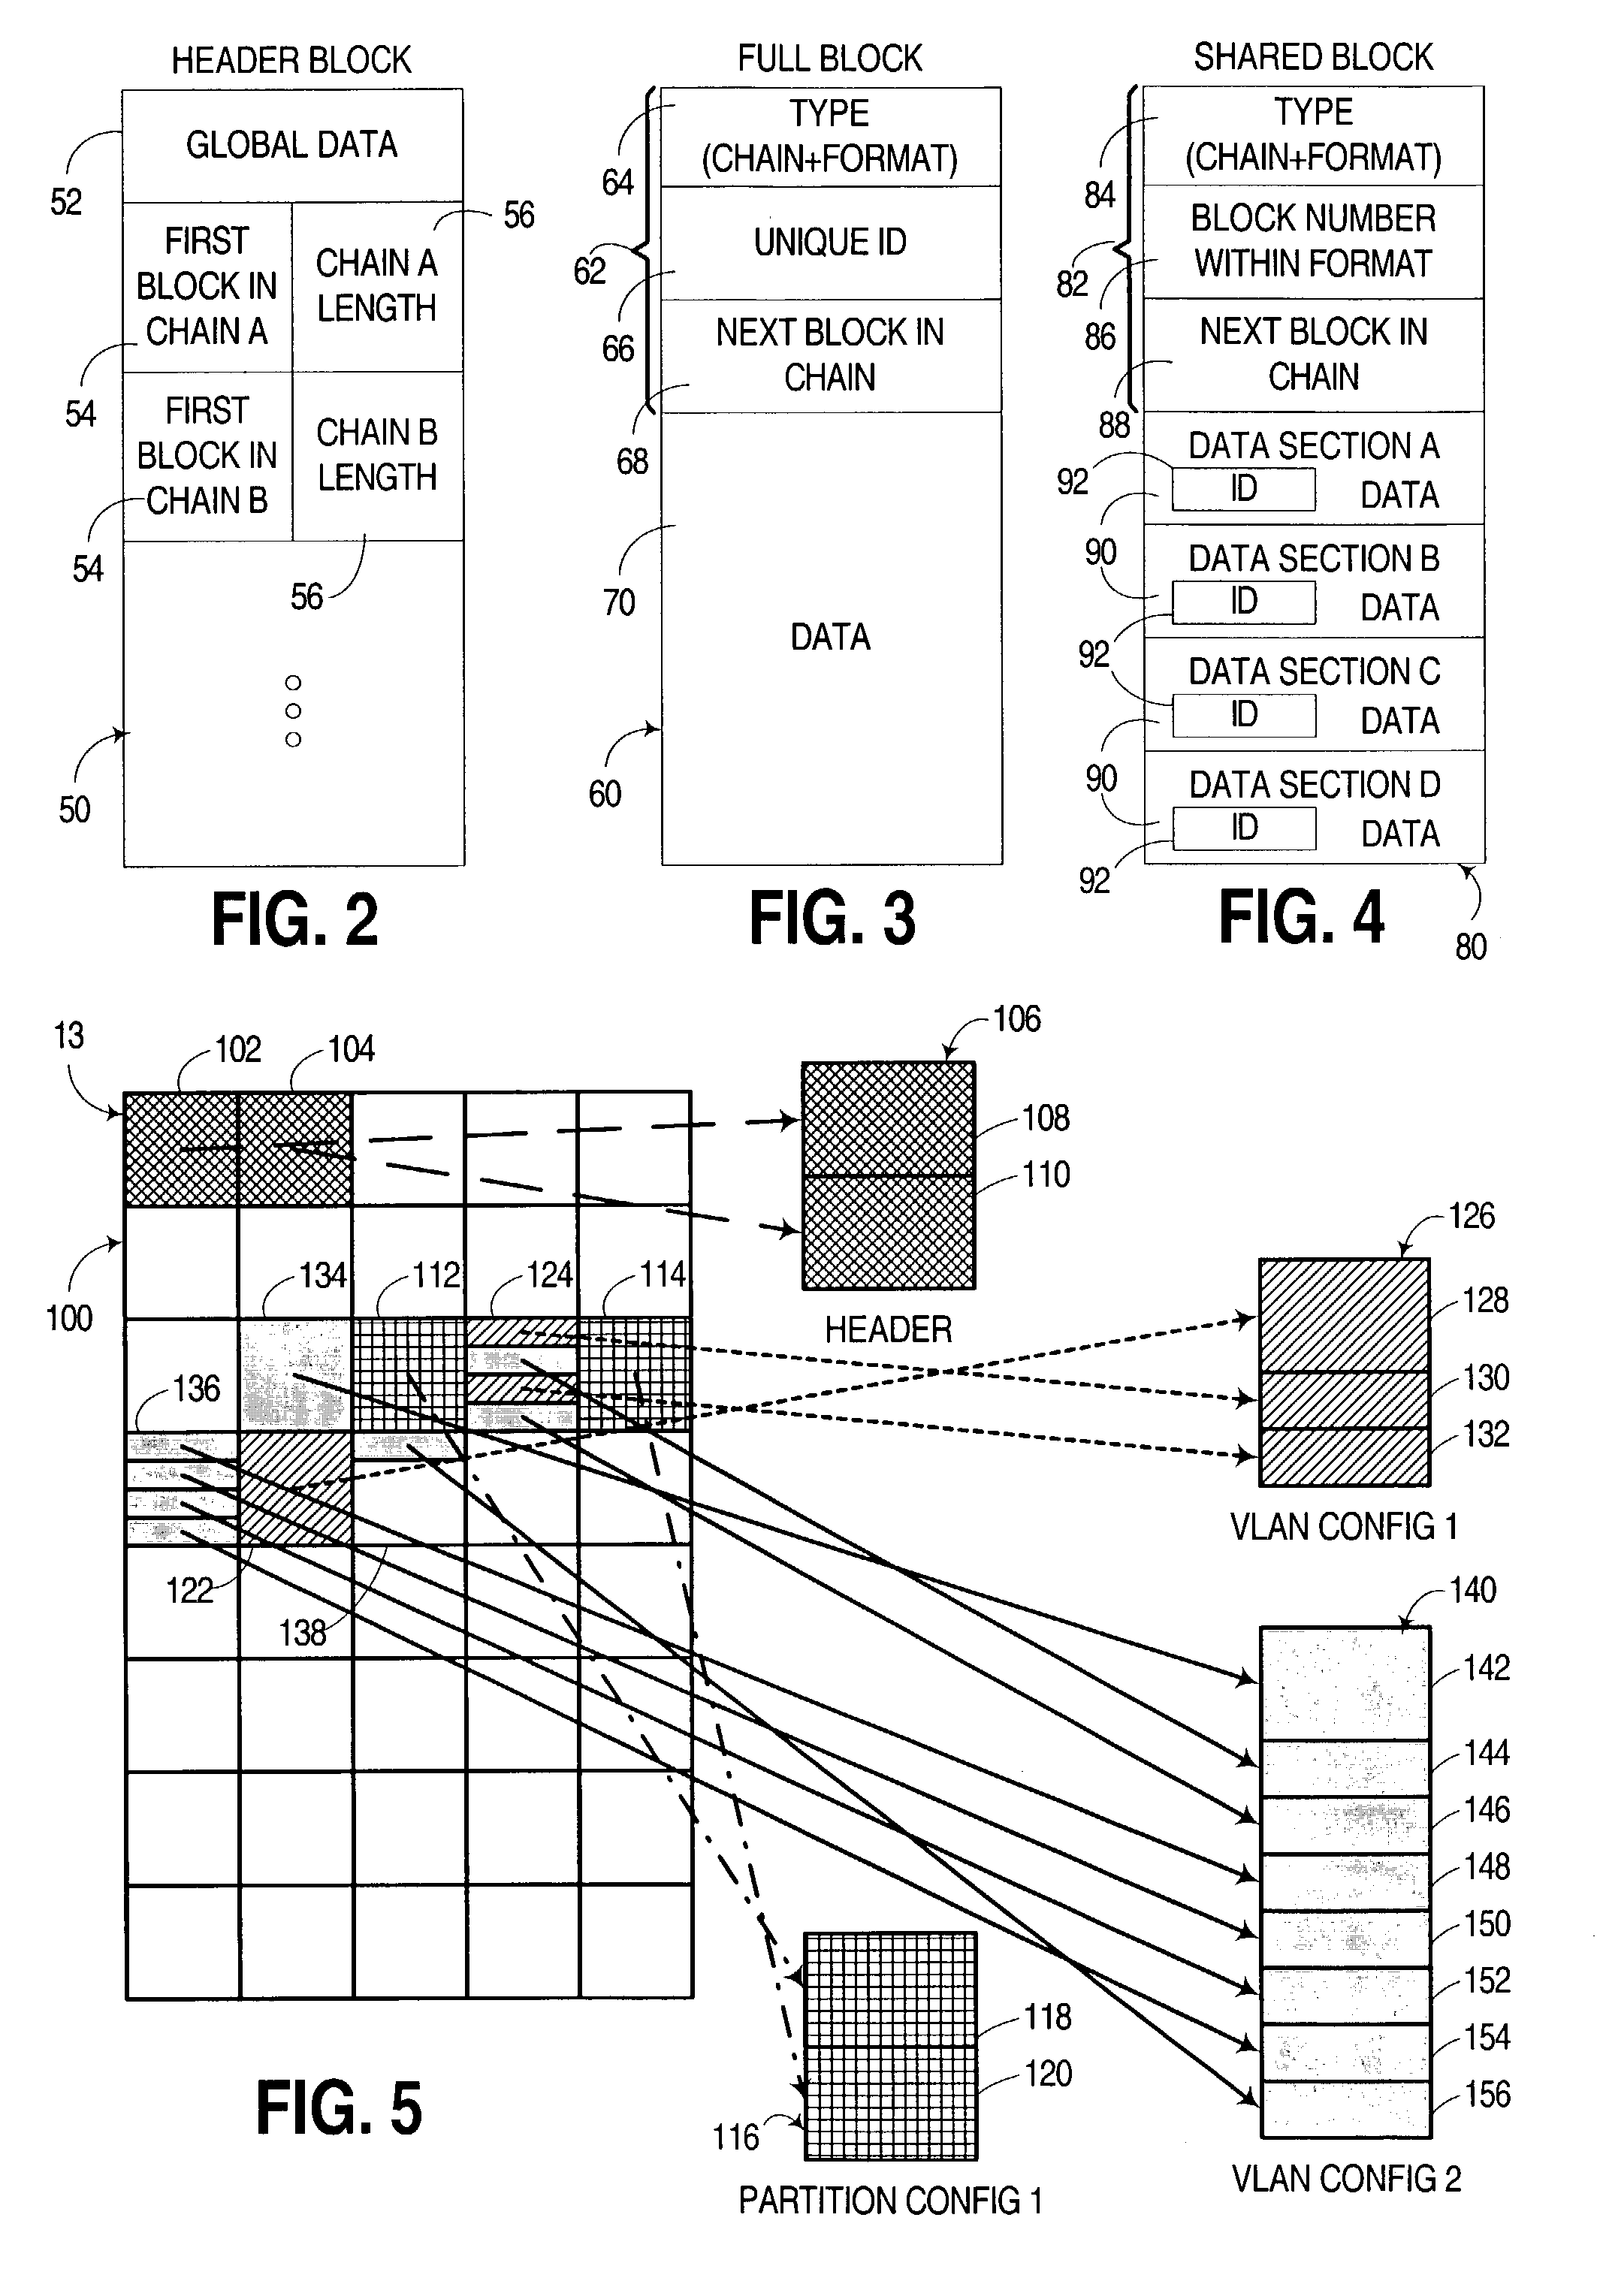 Storage and access of configuration data in nonvolatile memory of a logically-partitioned computer